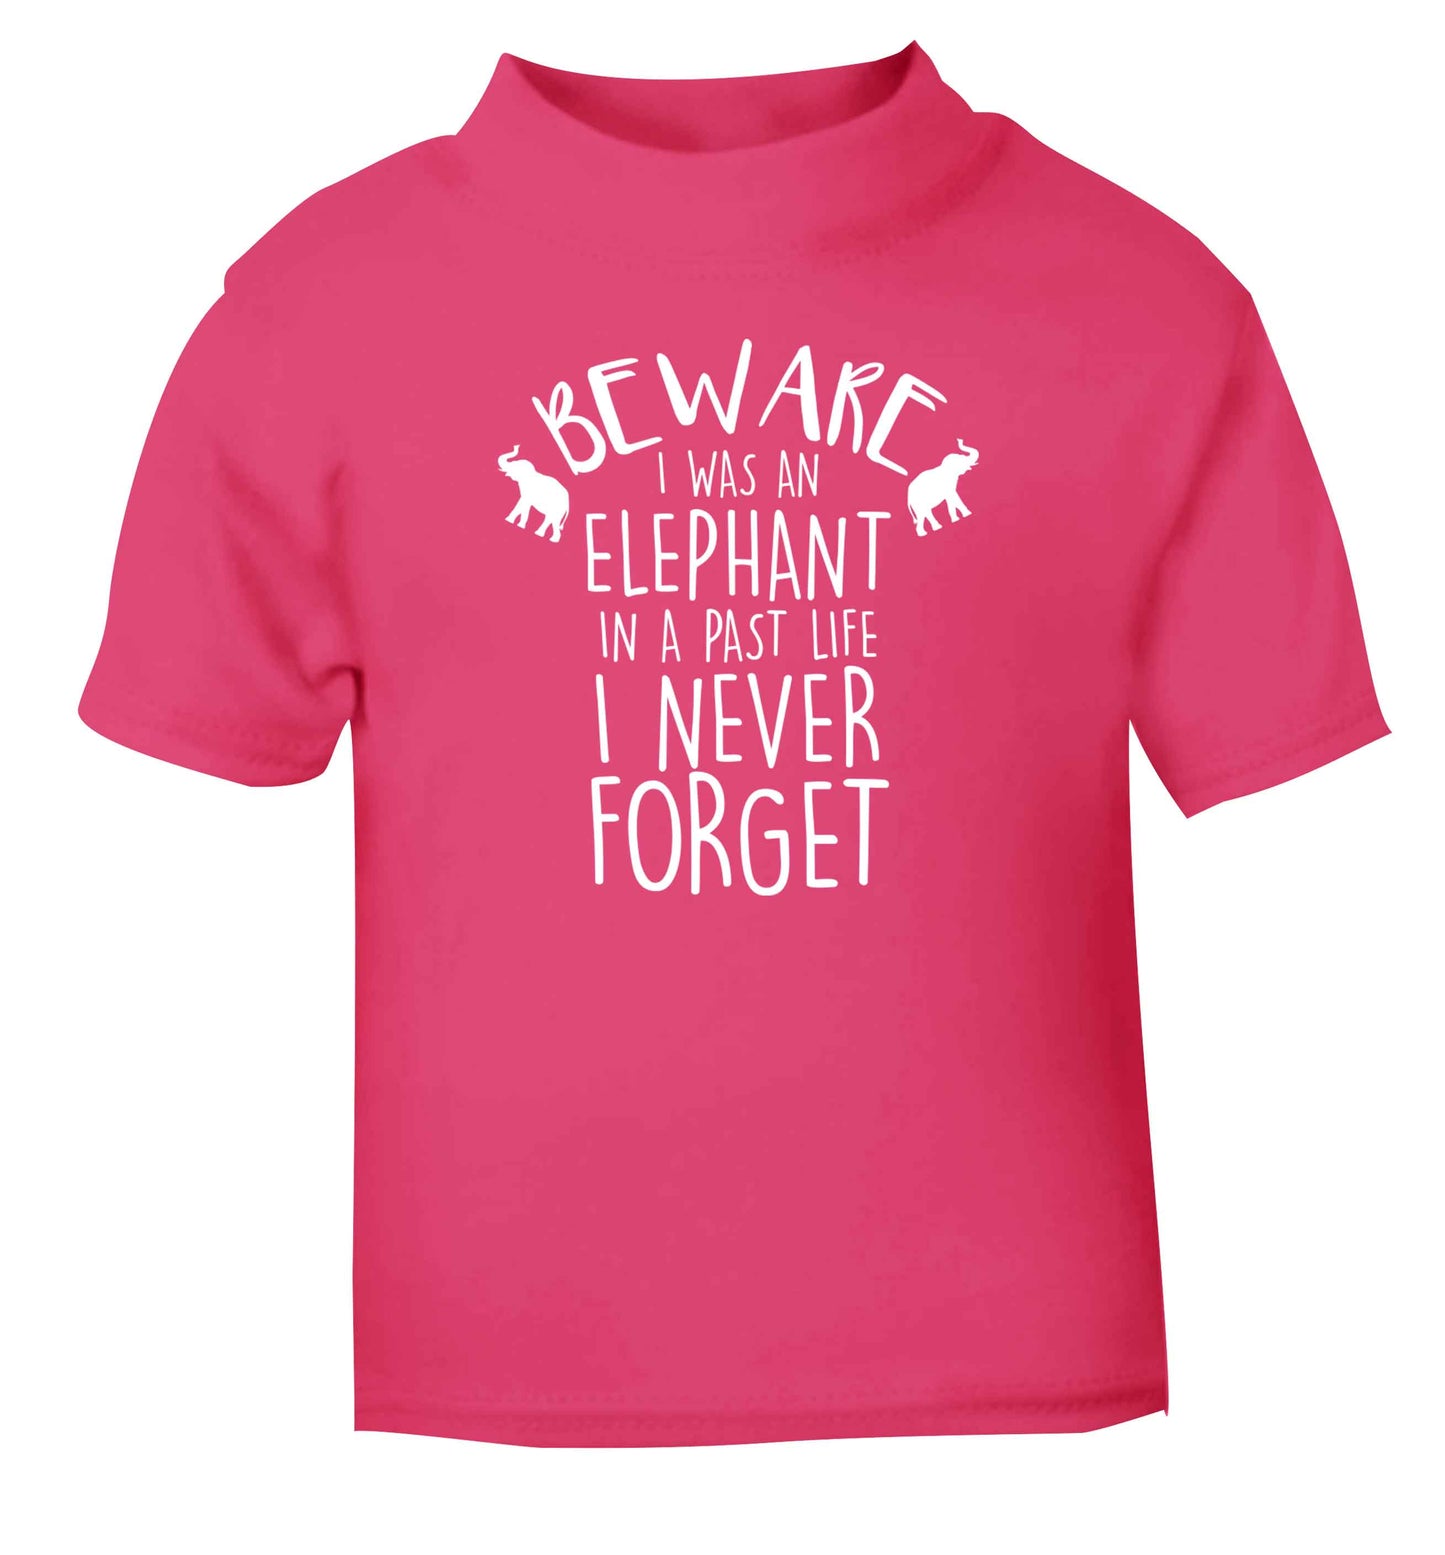 Beware I was an elephant in my past life I never forget pink Baby Toddler Tshirt 2 Years